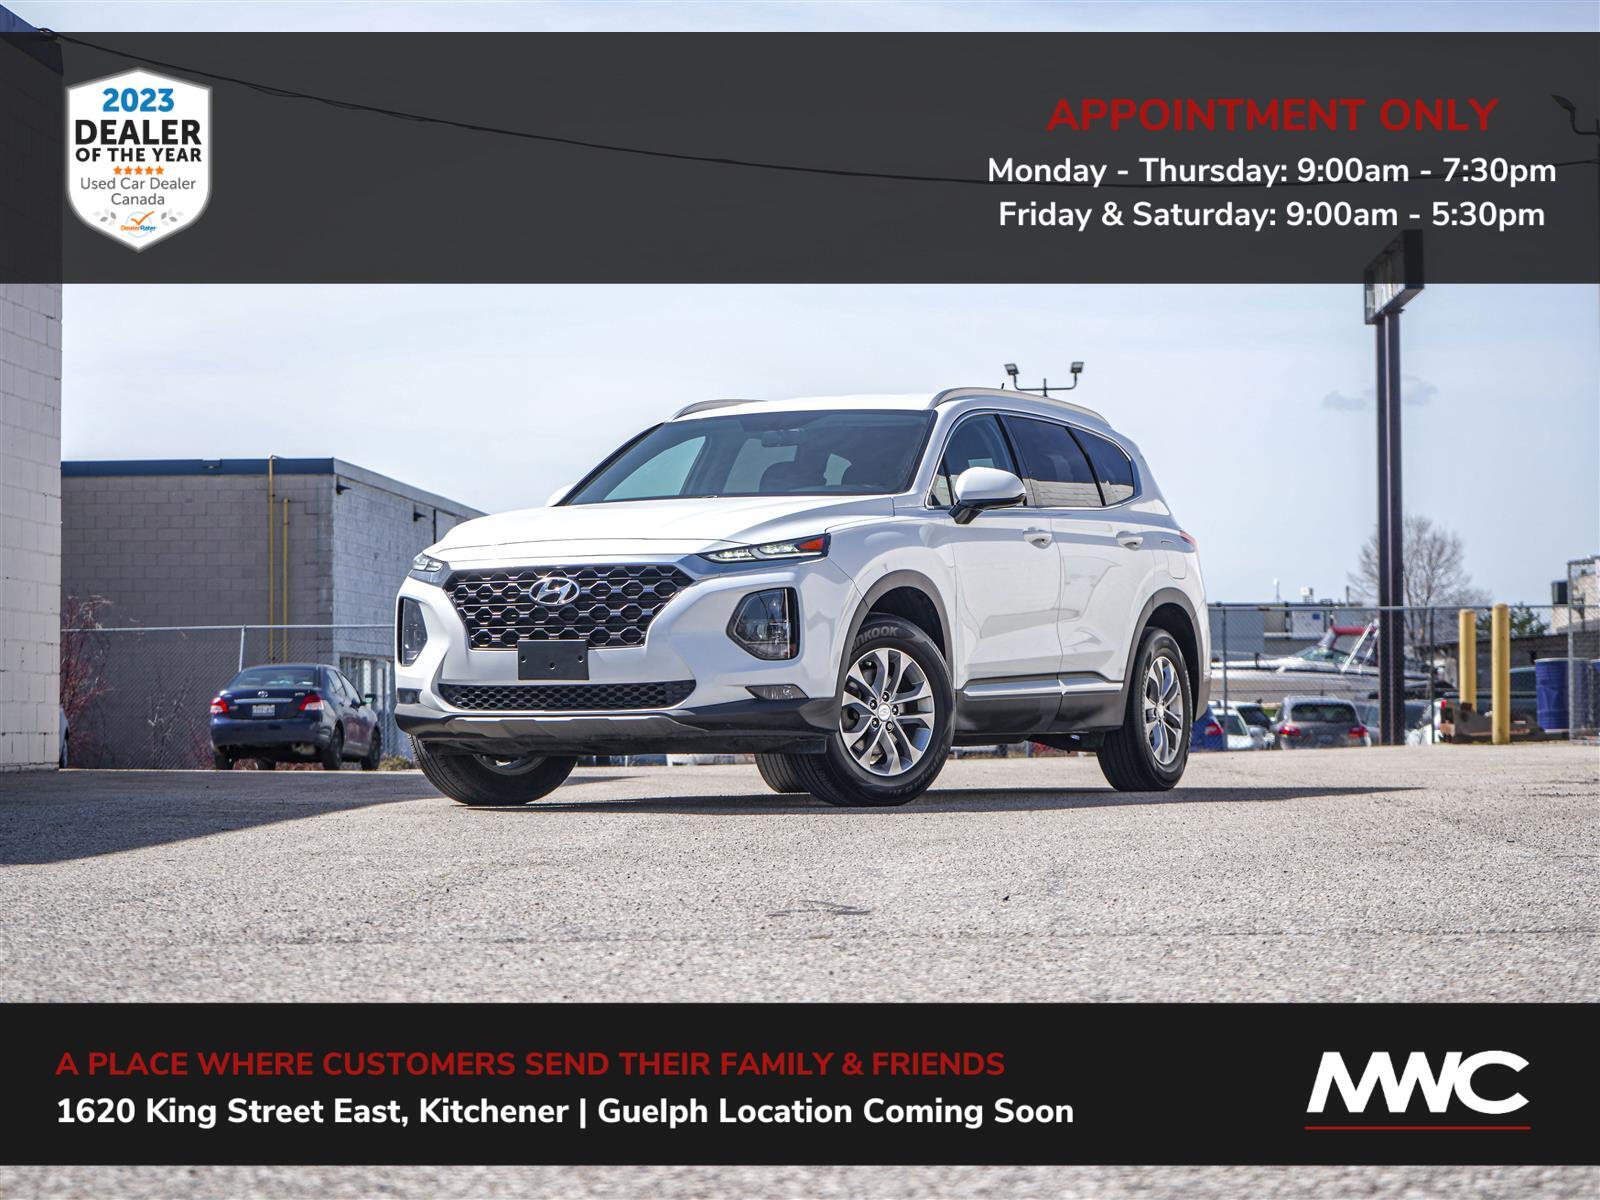 2020 Hyundai Santa Fe SE | IN GUELPH, BY APPT. ONLY